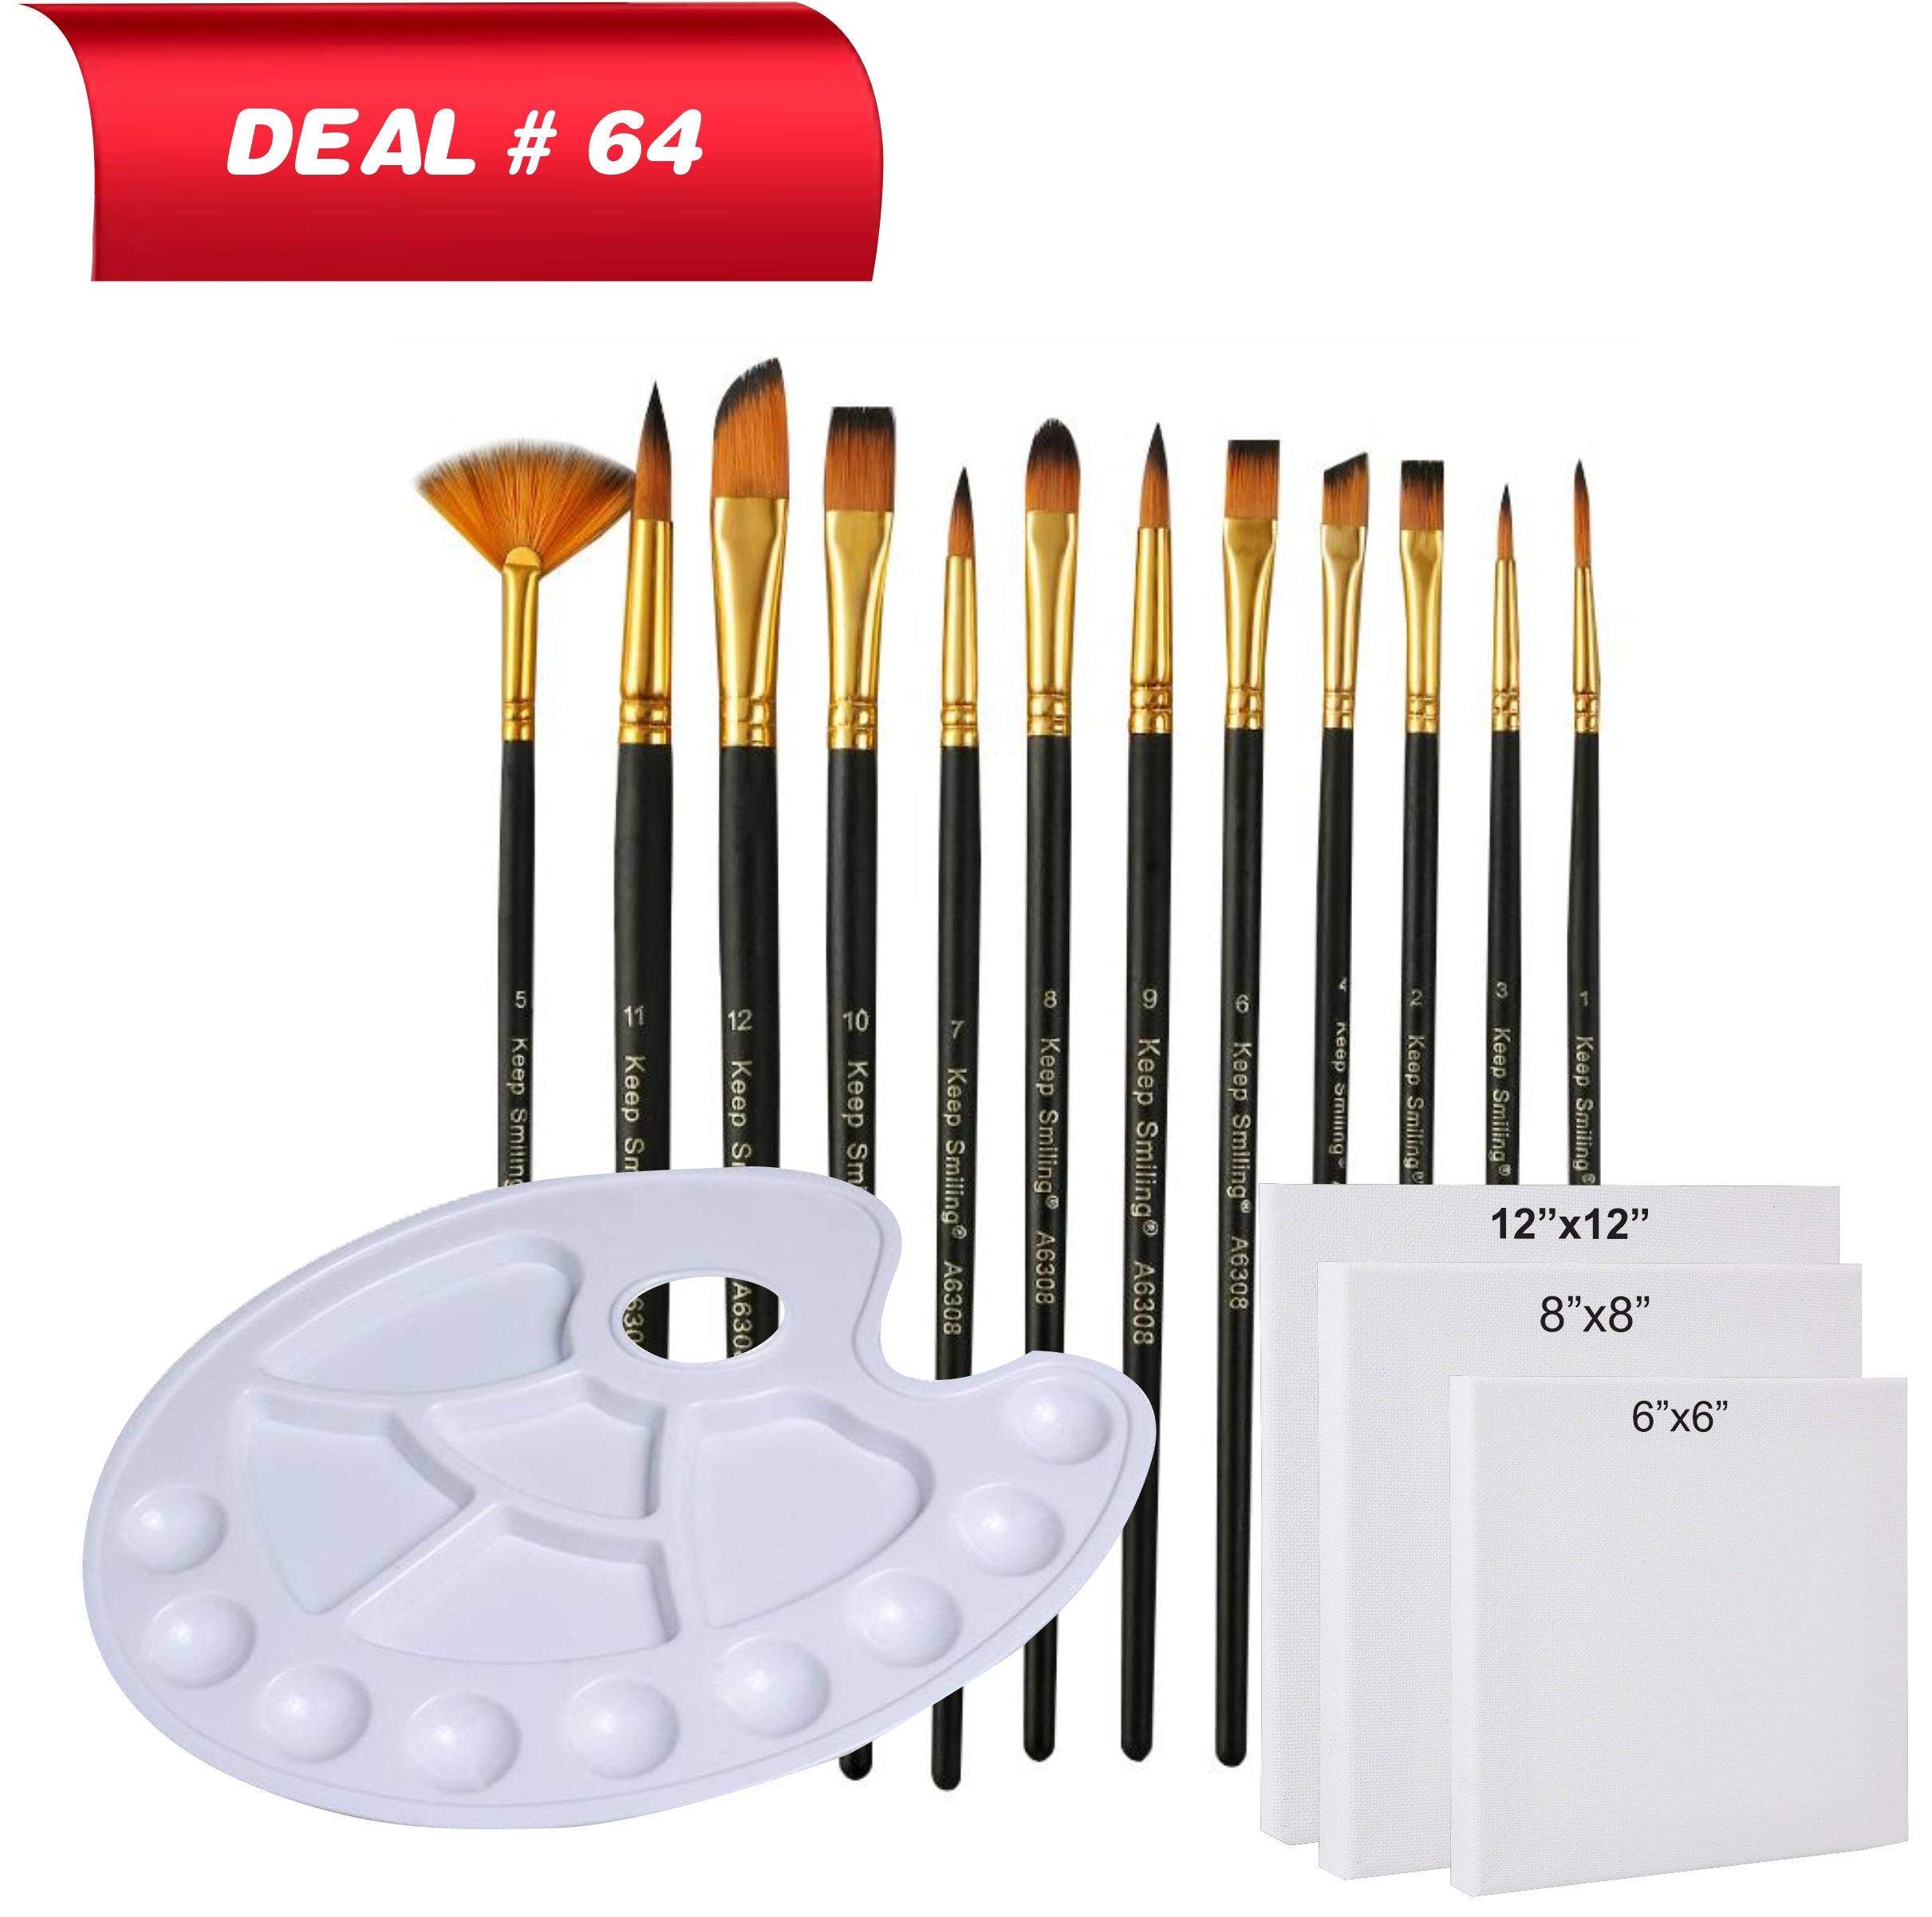 Canvas with Brush for Artsit's, Deal No.64